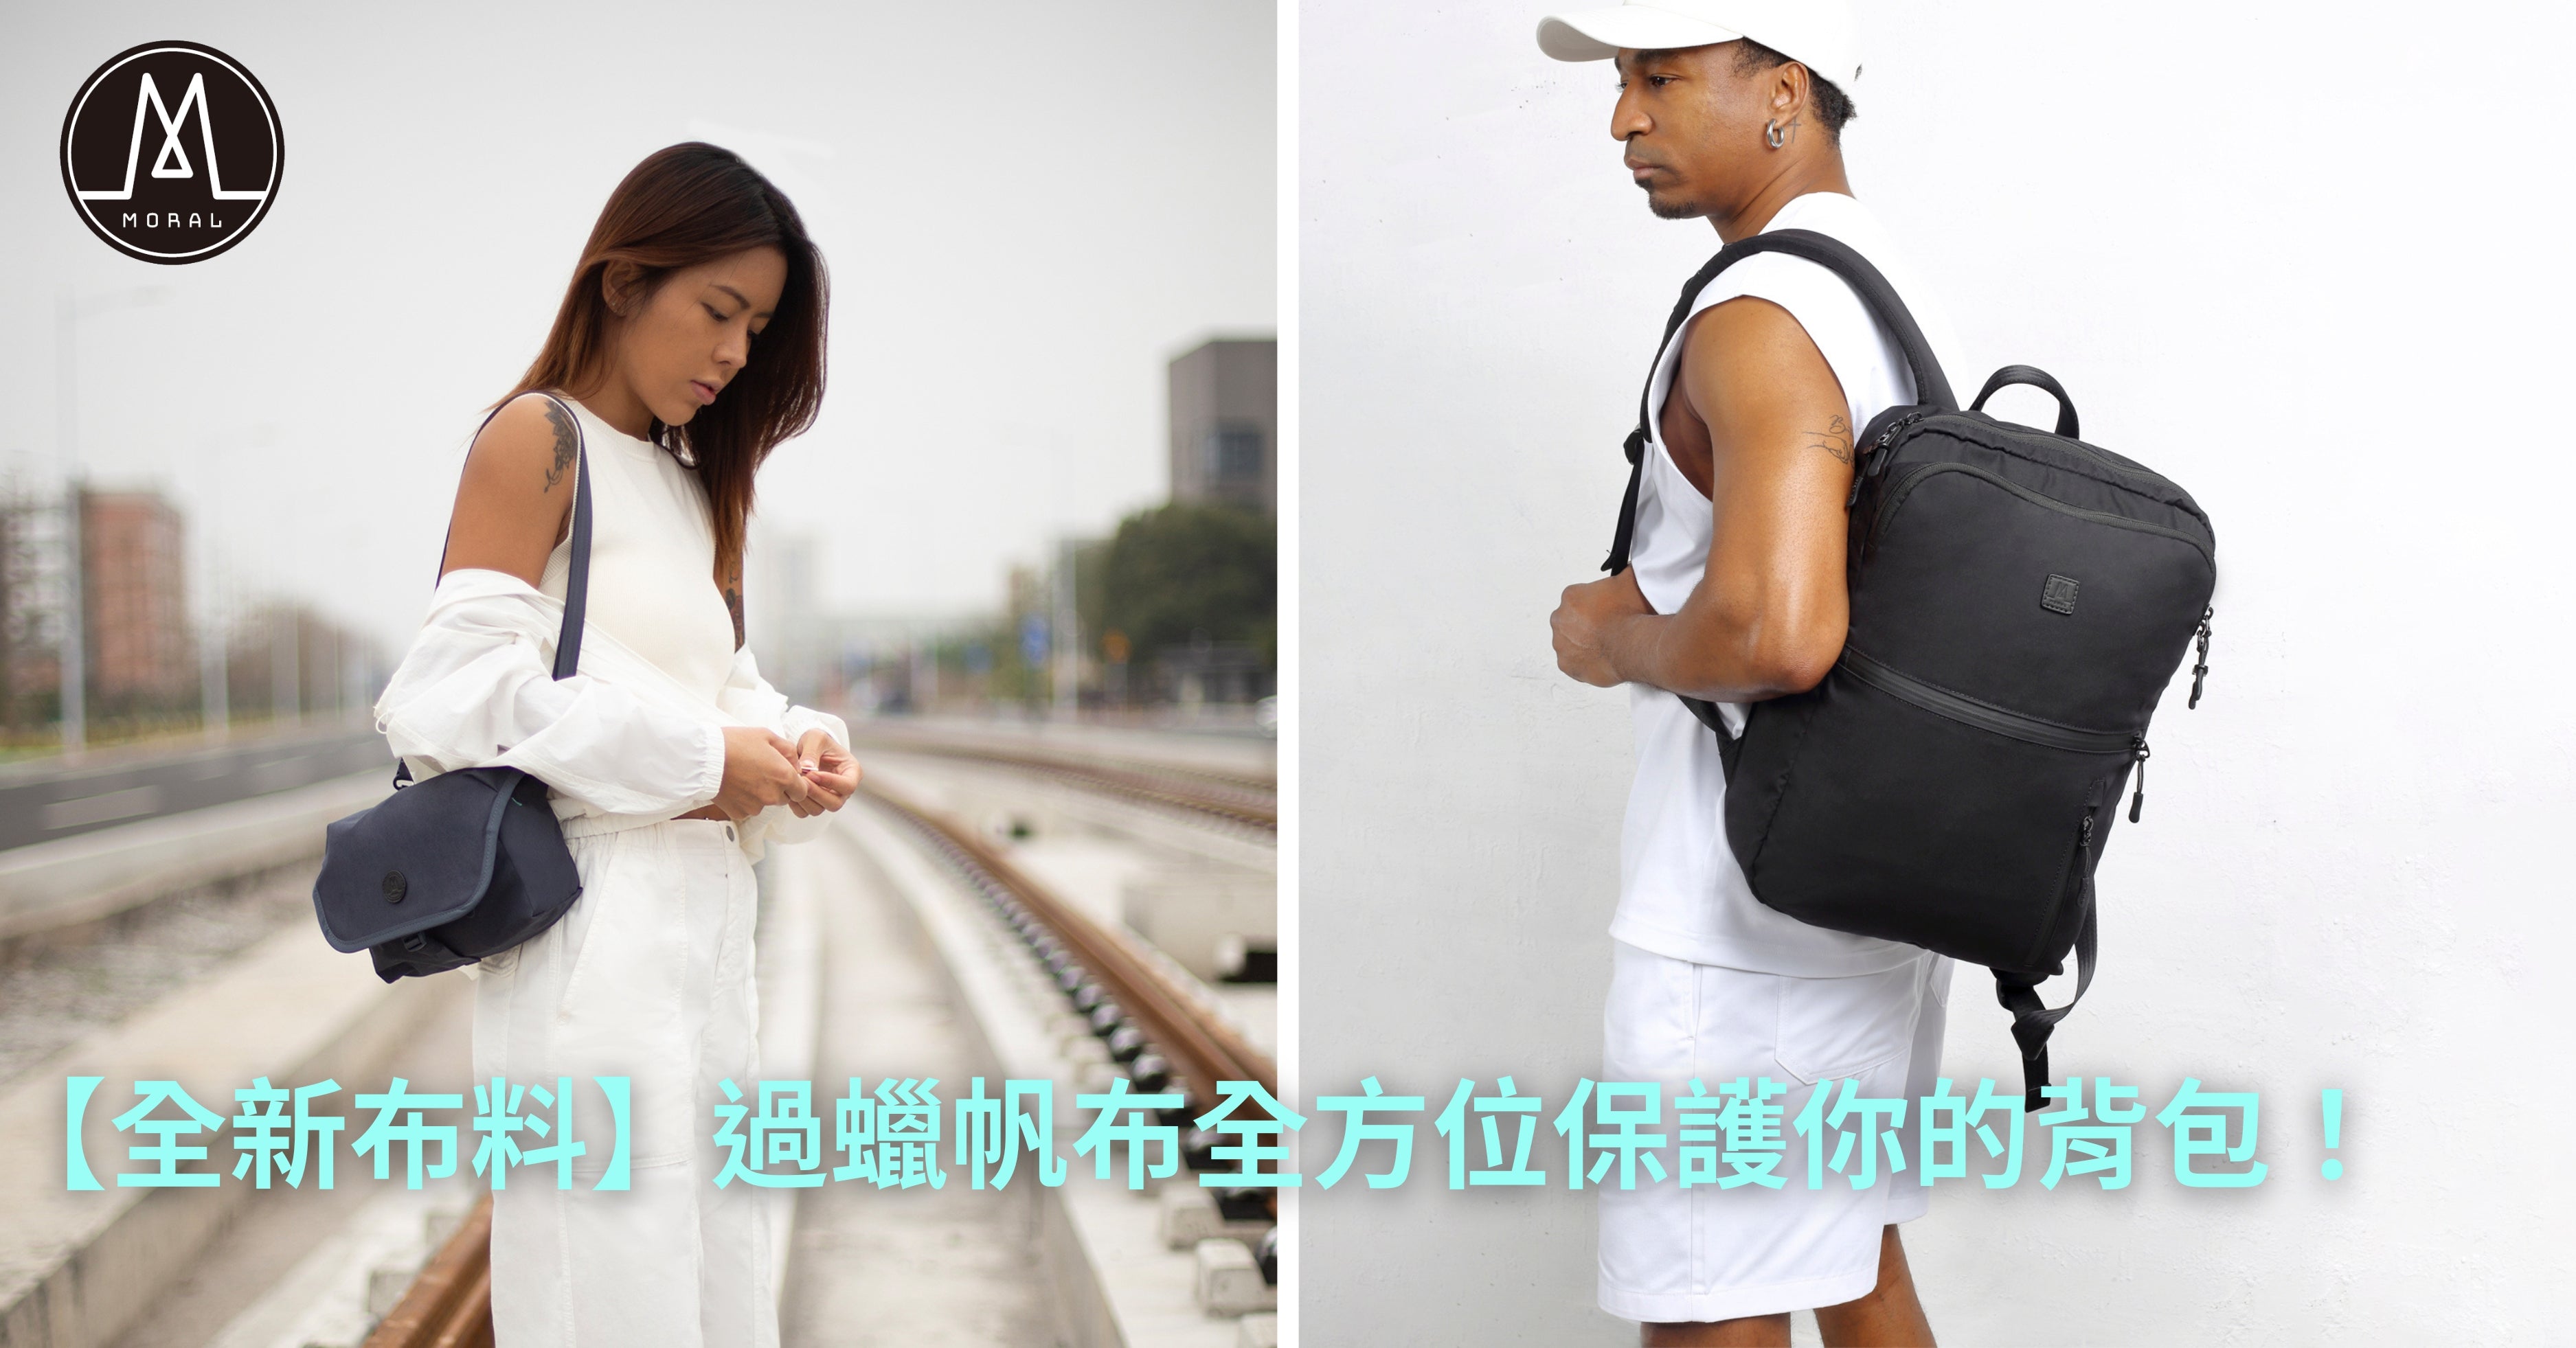 【New Fabric】Arm Your Backpack with Waxed Canvas for Full Protection Against the Rainy Season Showdown!